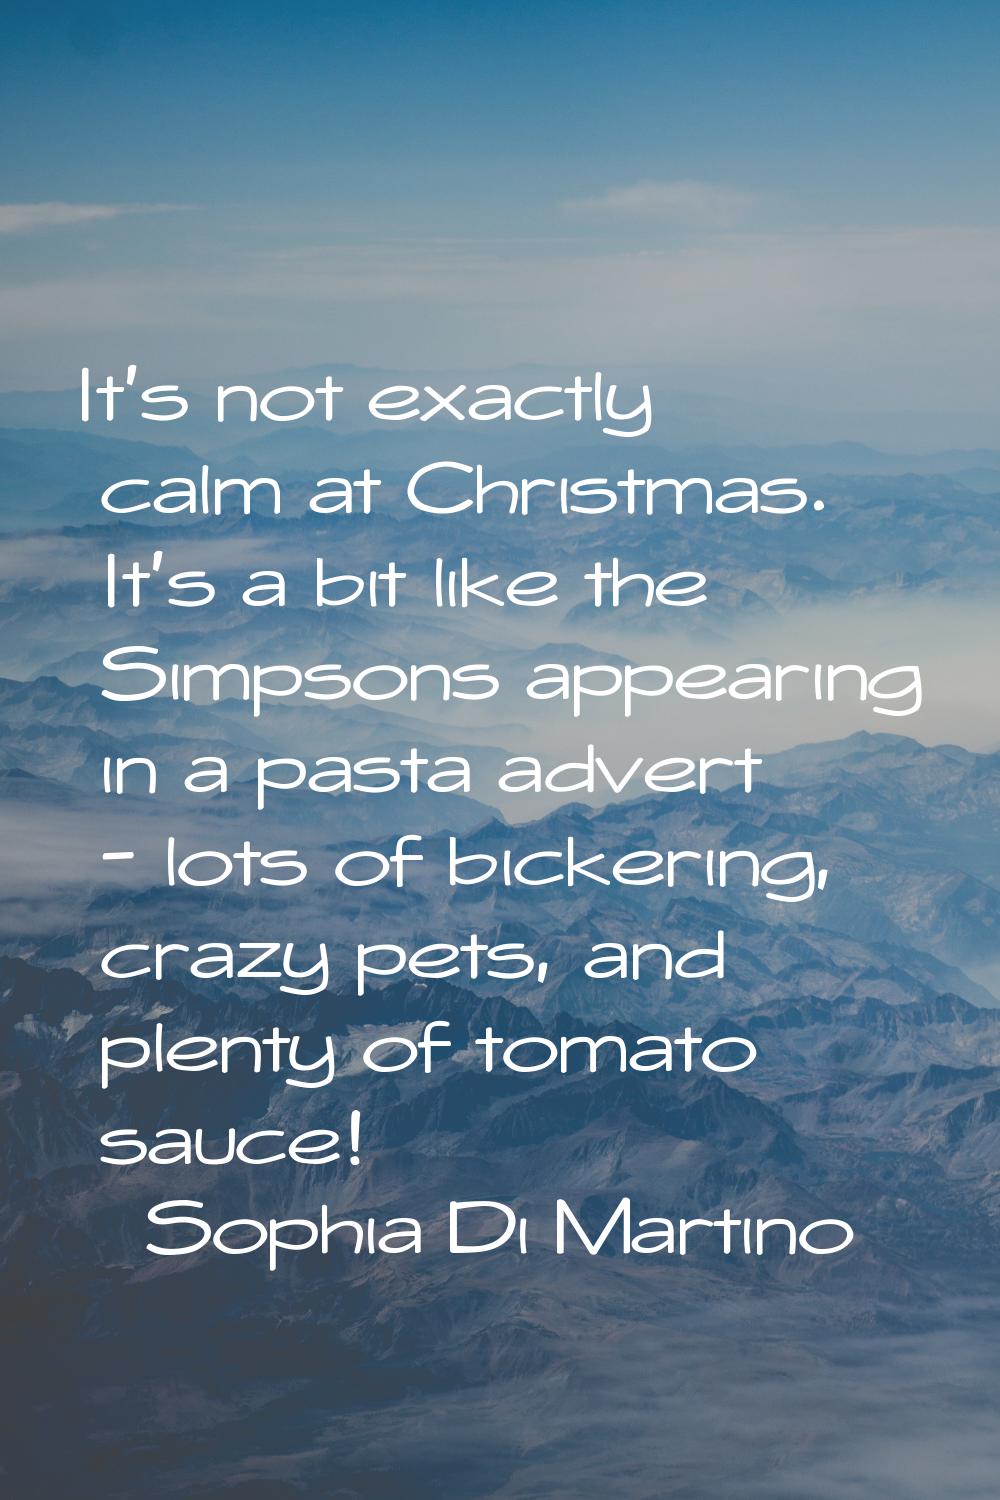 It's not exactly calm at Christmas. It's a bit like the Simpsons appearing in a pasta advert - lots